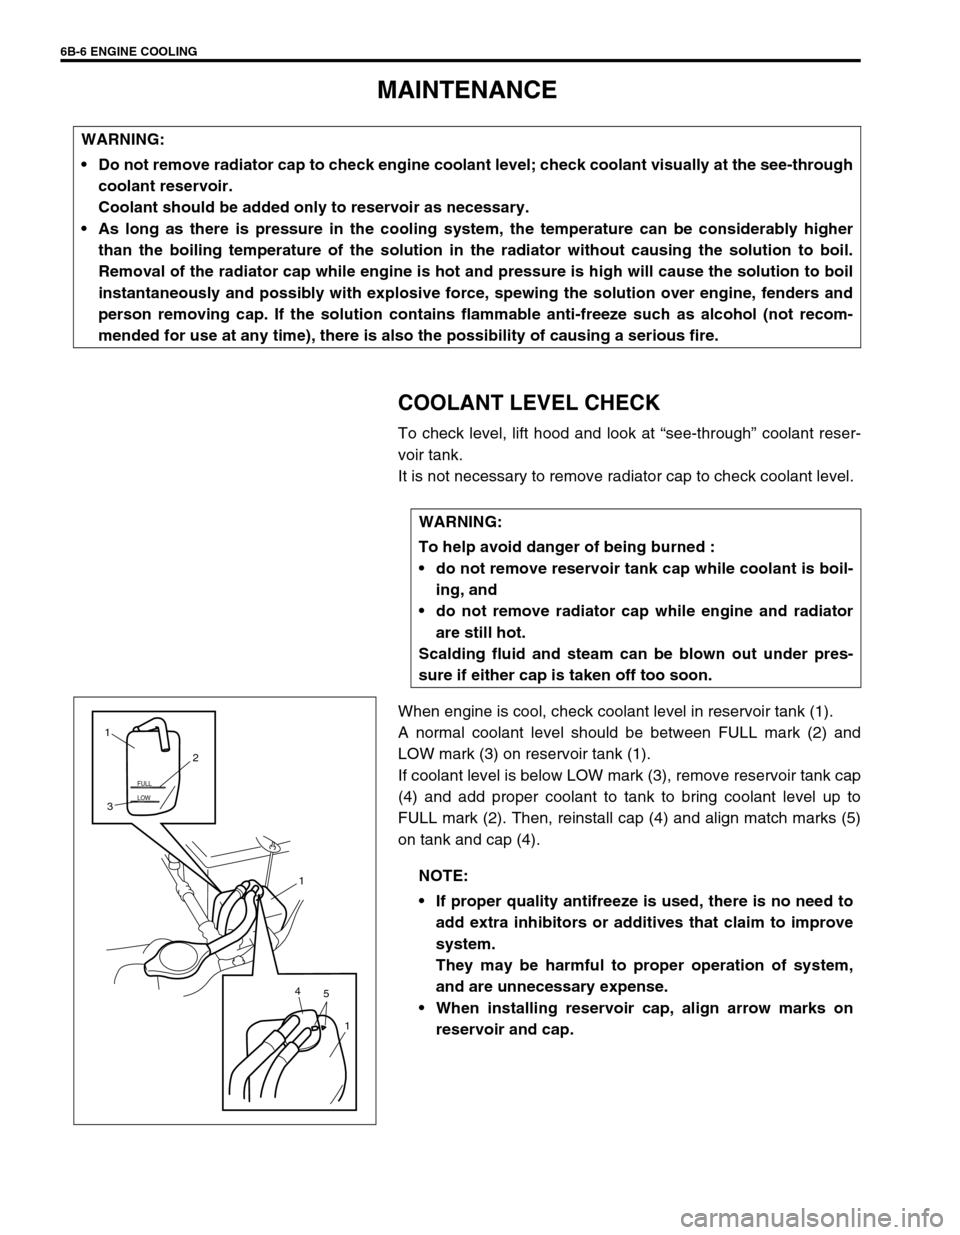 SUZUKI SWIFT 2000 1.G RG413 Service Service Manual 6B-6 ENGINE COOLING
MAINTENANCE
COOLANT LEVEL CHECK
To check level, lift hood and look at “see-through” coolant reser-
voir tank.
It is not necessary to remove radiator cap to check coolant level.